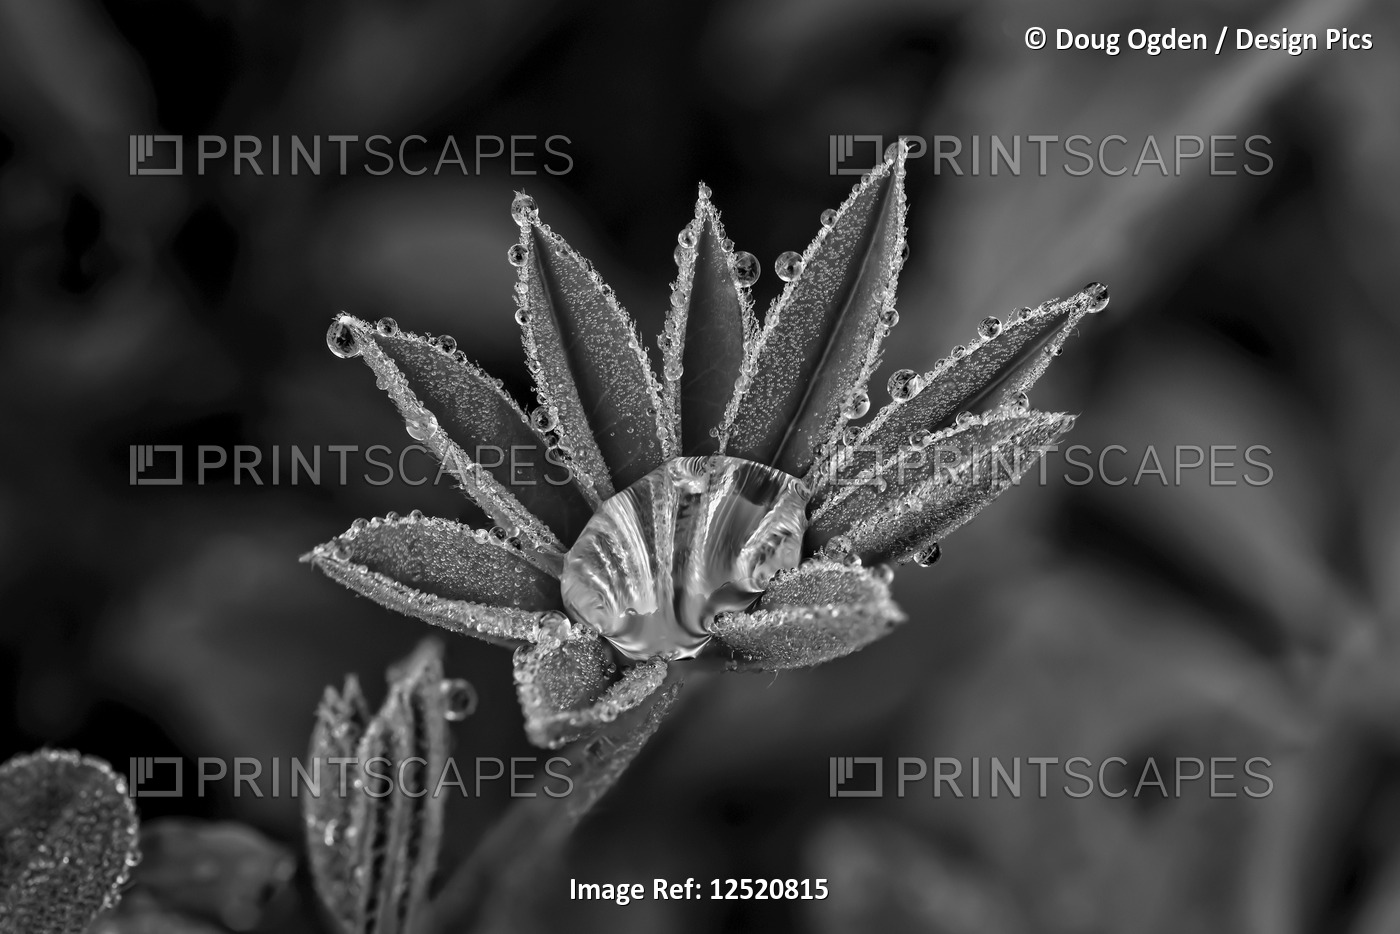 Lupine leaves with dew drops in black and white; United States of America